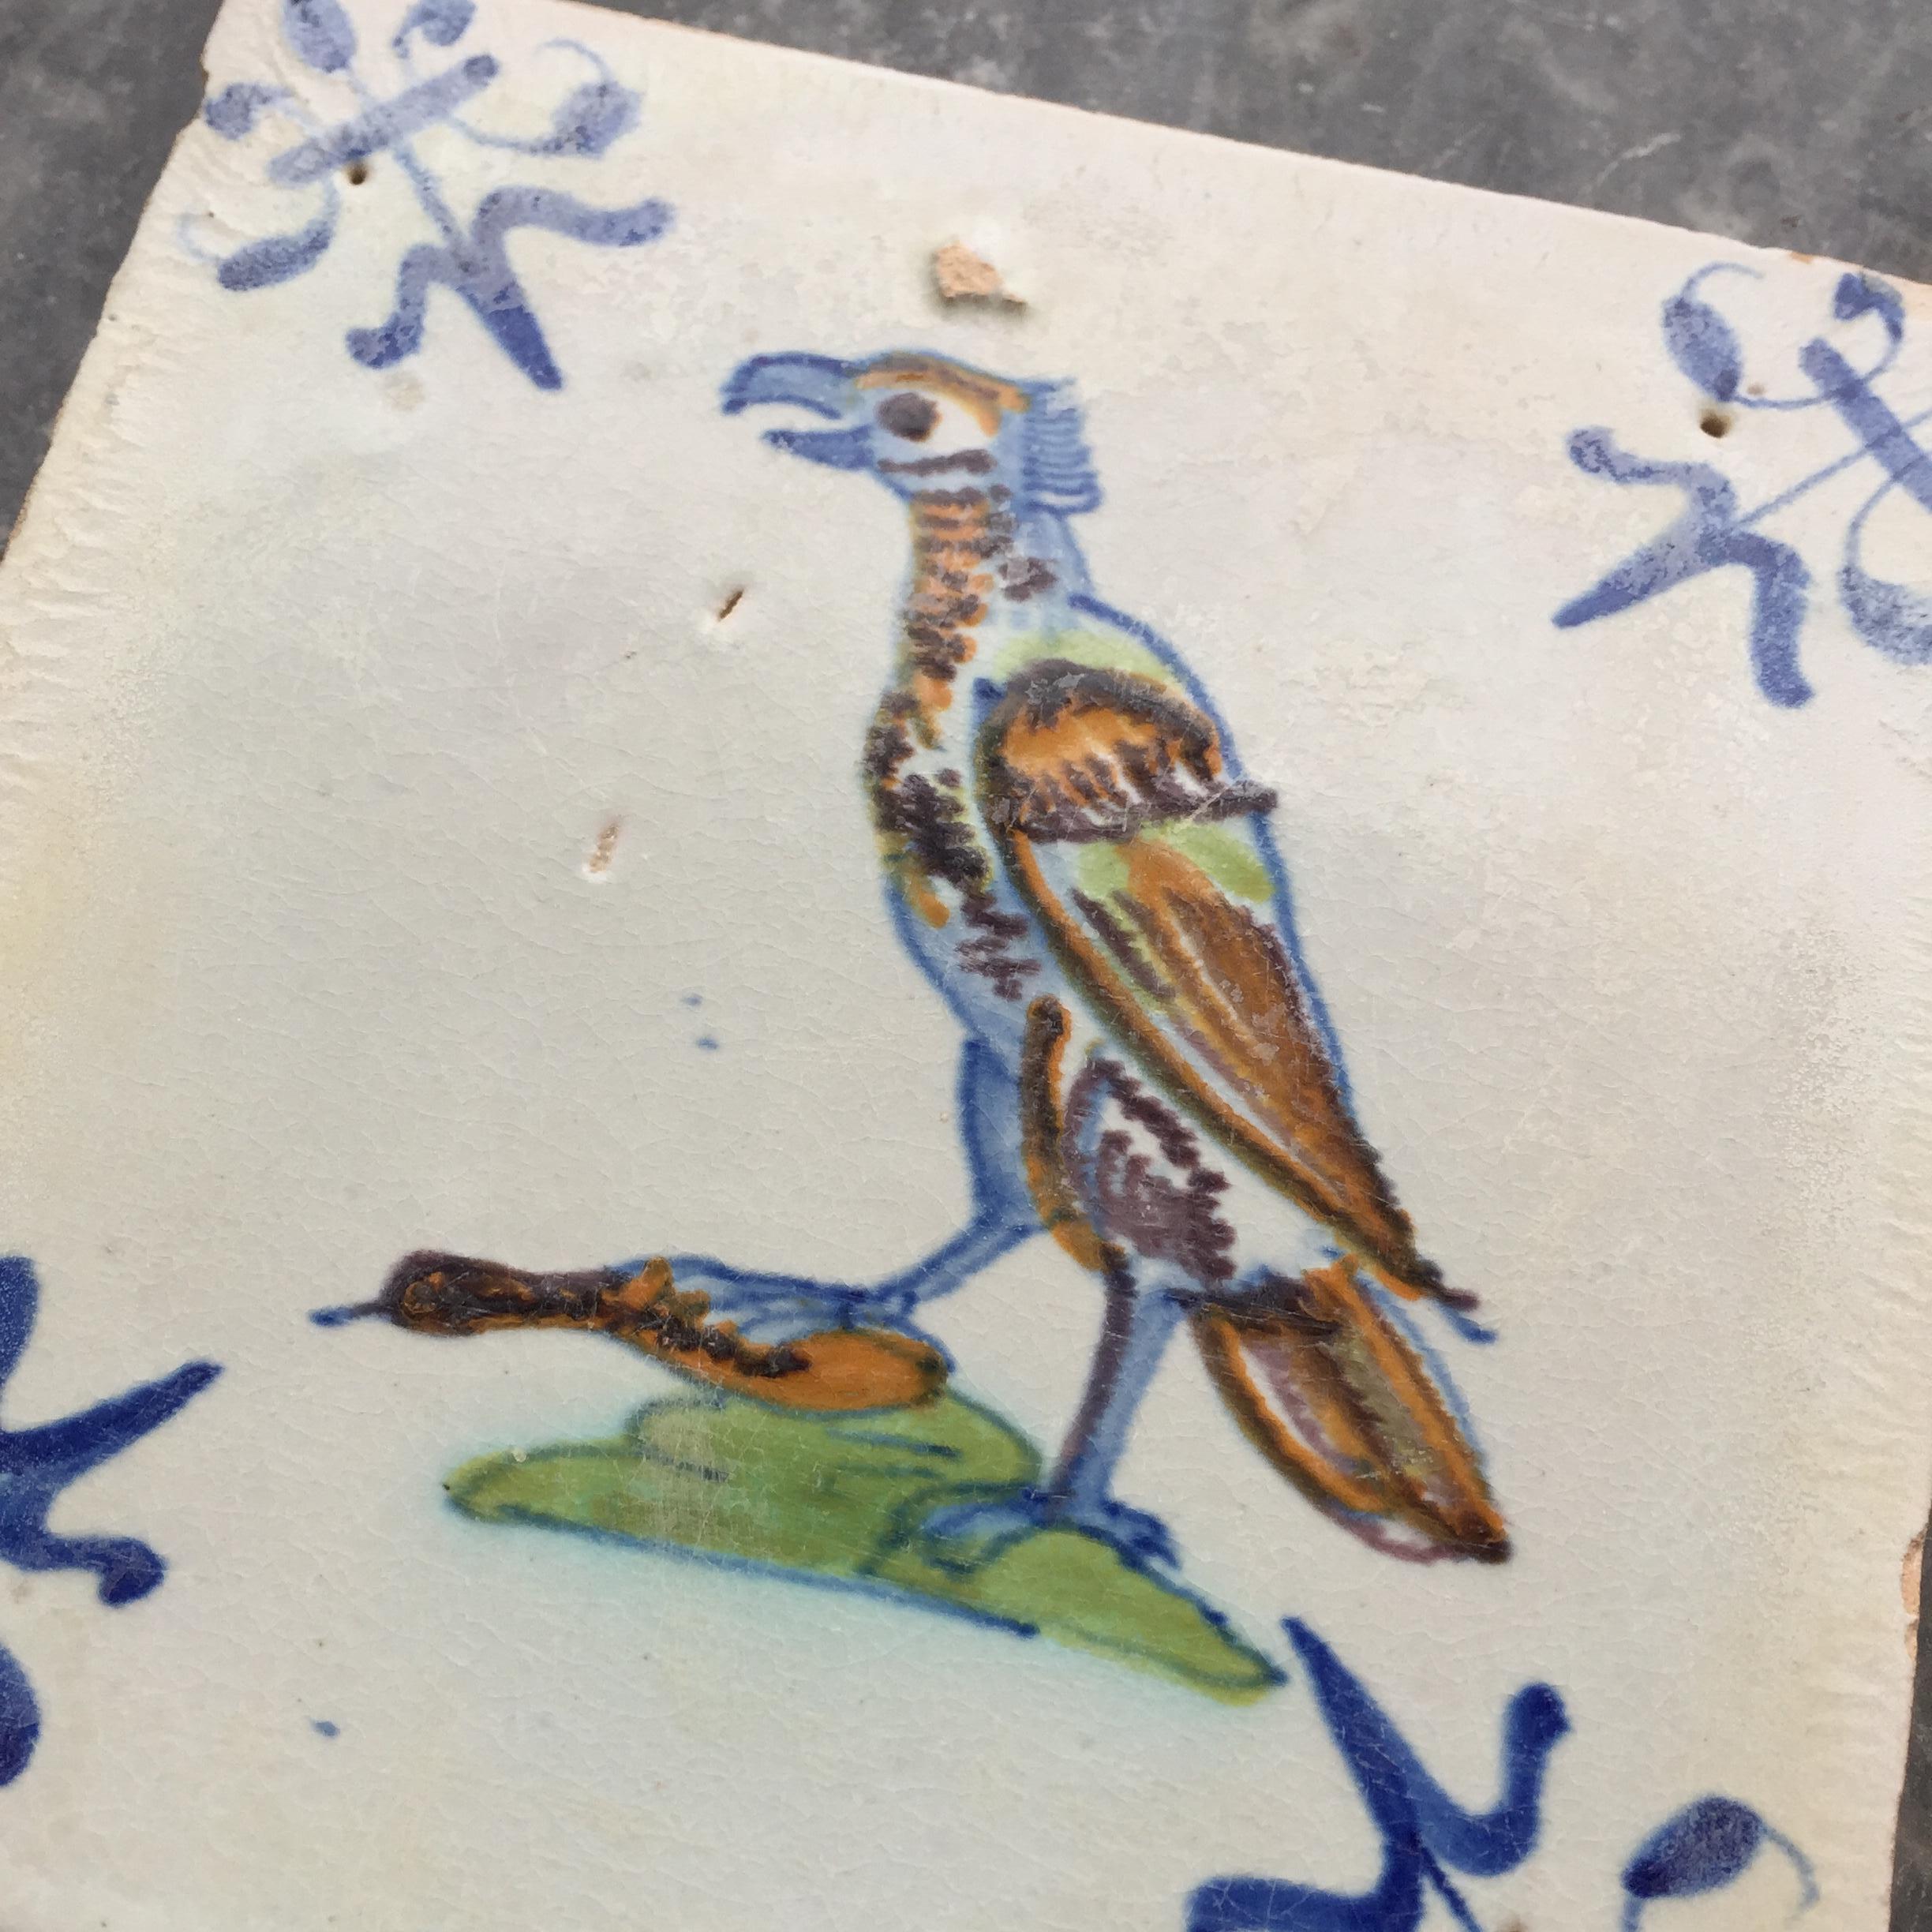 Fired Rare 17th Century Dutch Delft Tile with Decoration of a Predator Bird with Prey For Sale